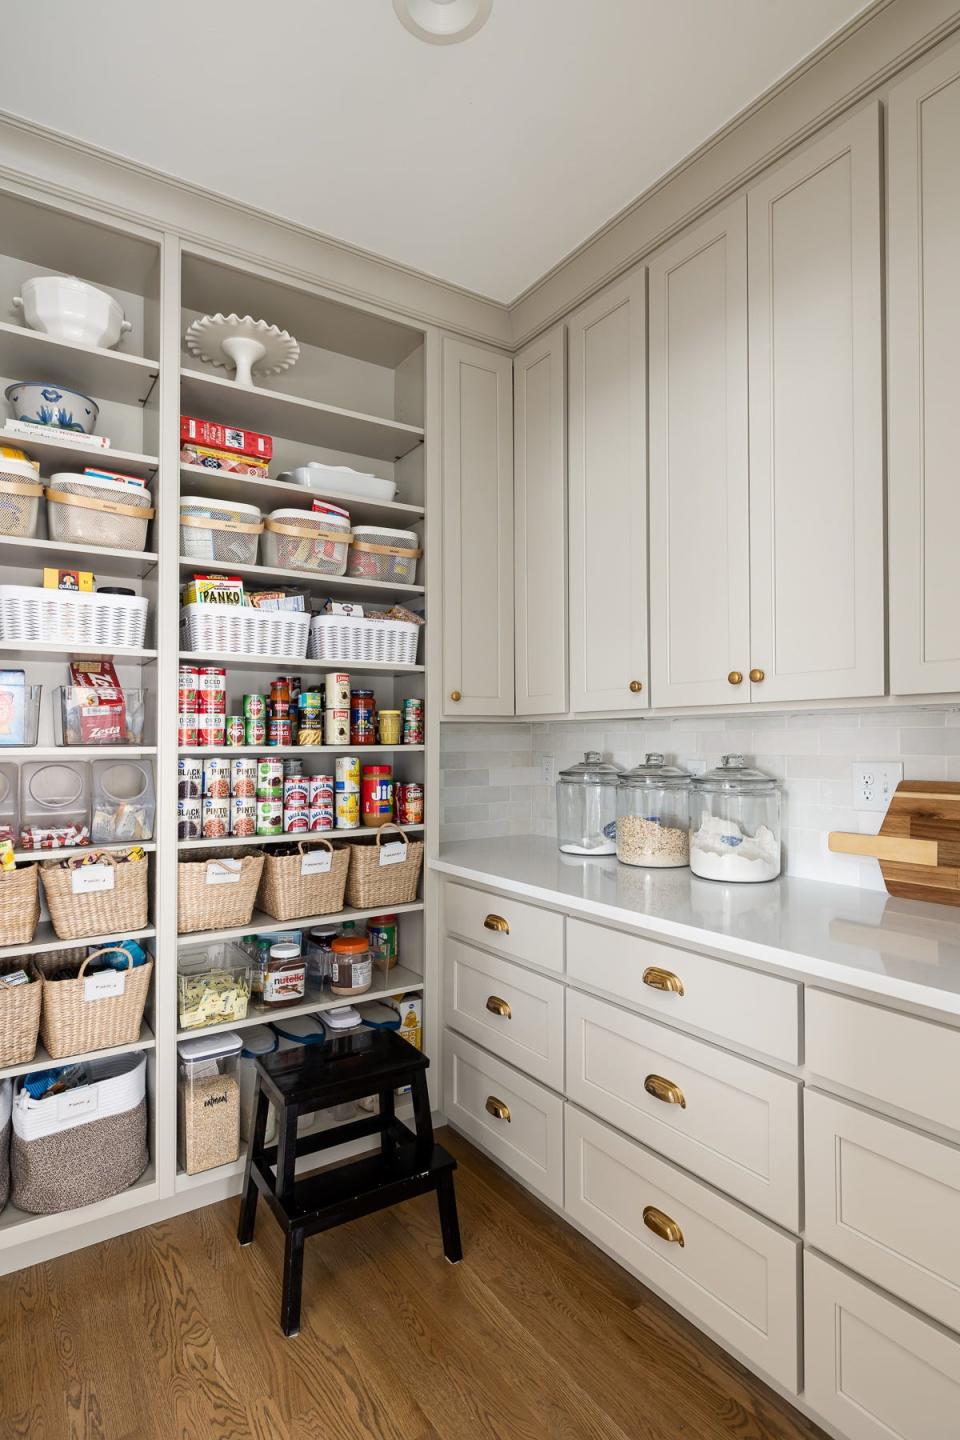 The renovated pantry features cabinetry to match the kitchen in this renovated home in the Hillcrest subdivision of Prospect.